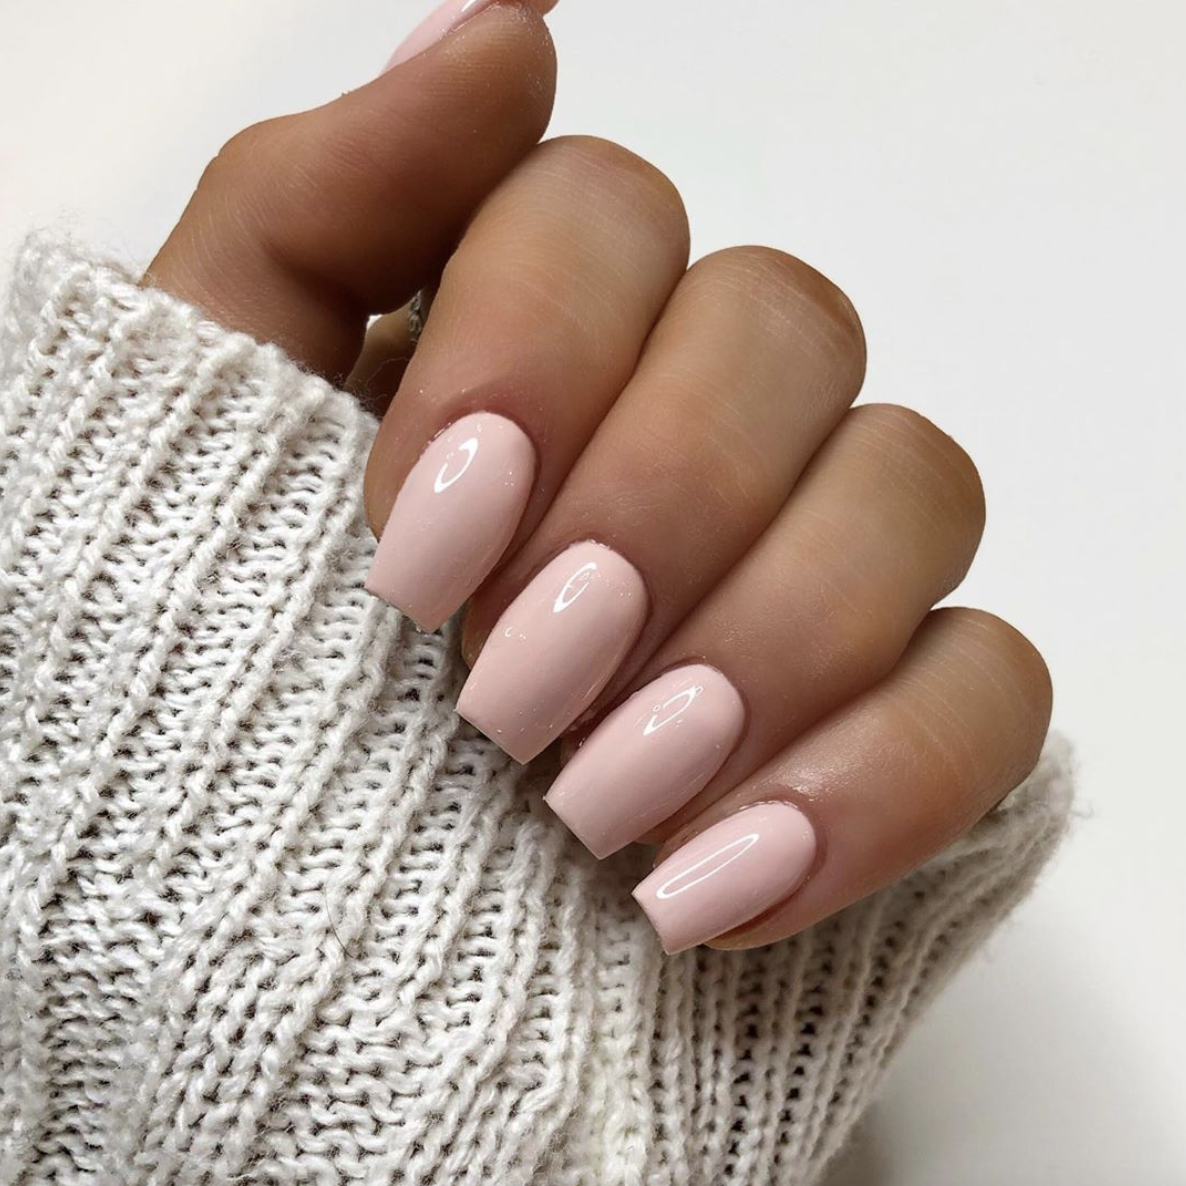 Here's all the inspiration you need for your upcoming nail appointment ...